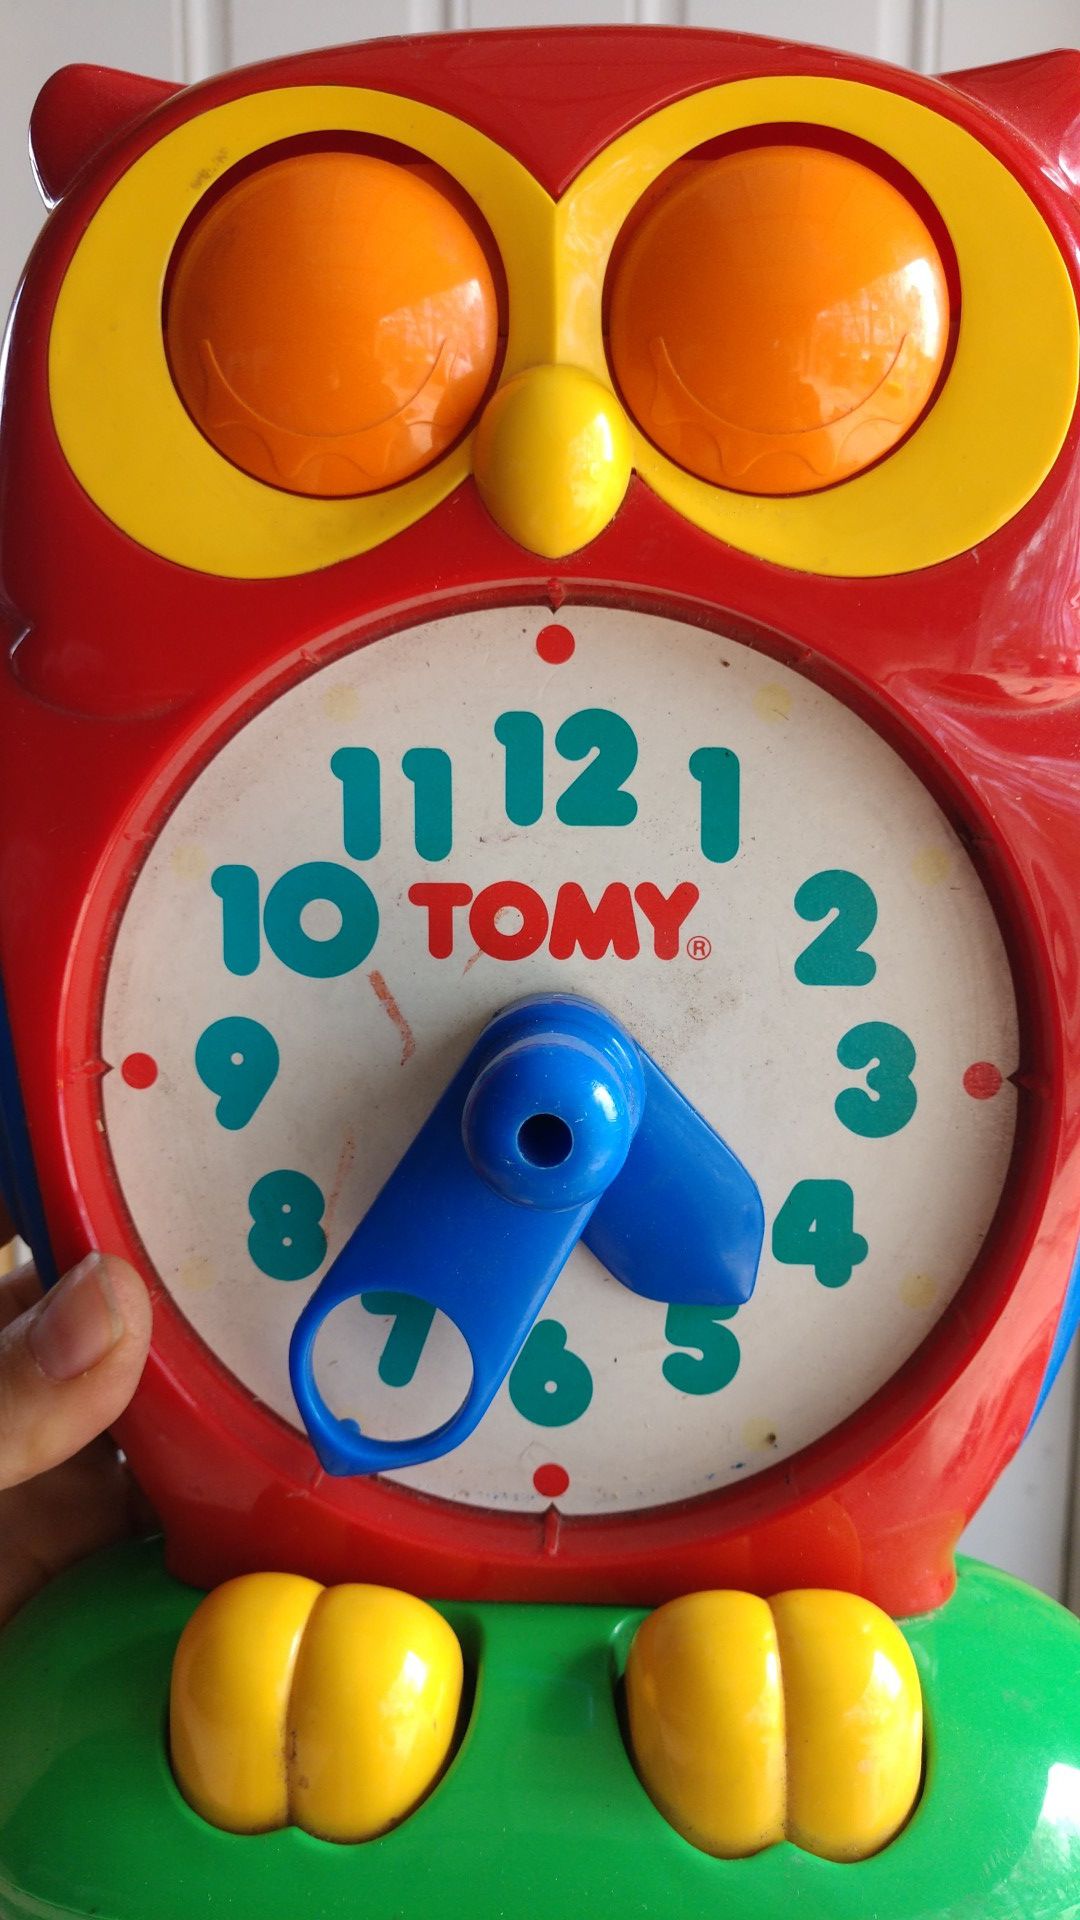 Tomy learning clock